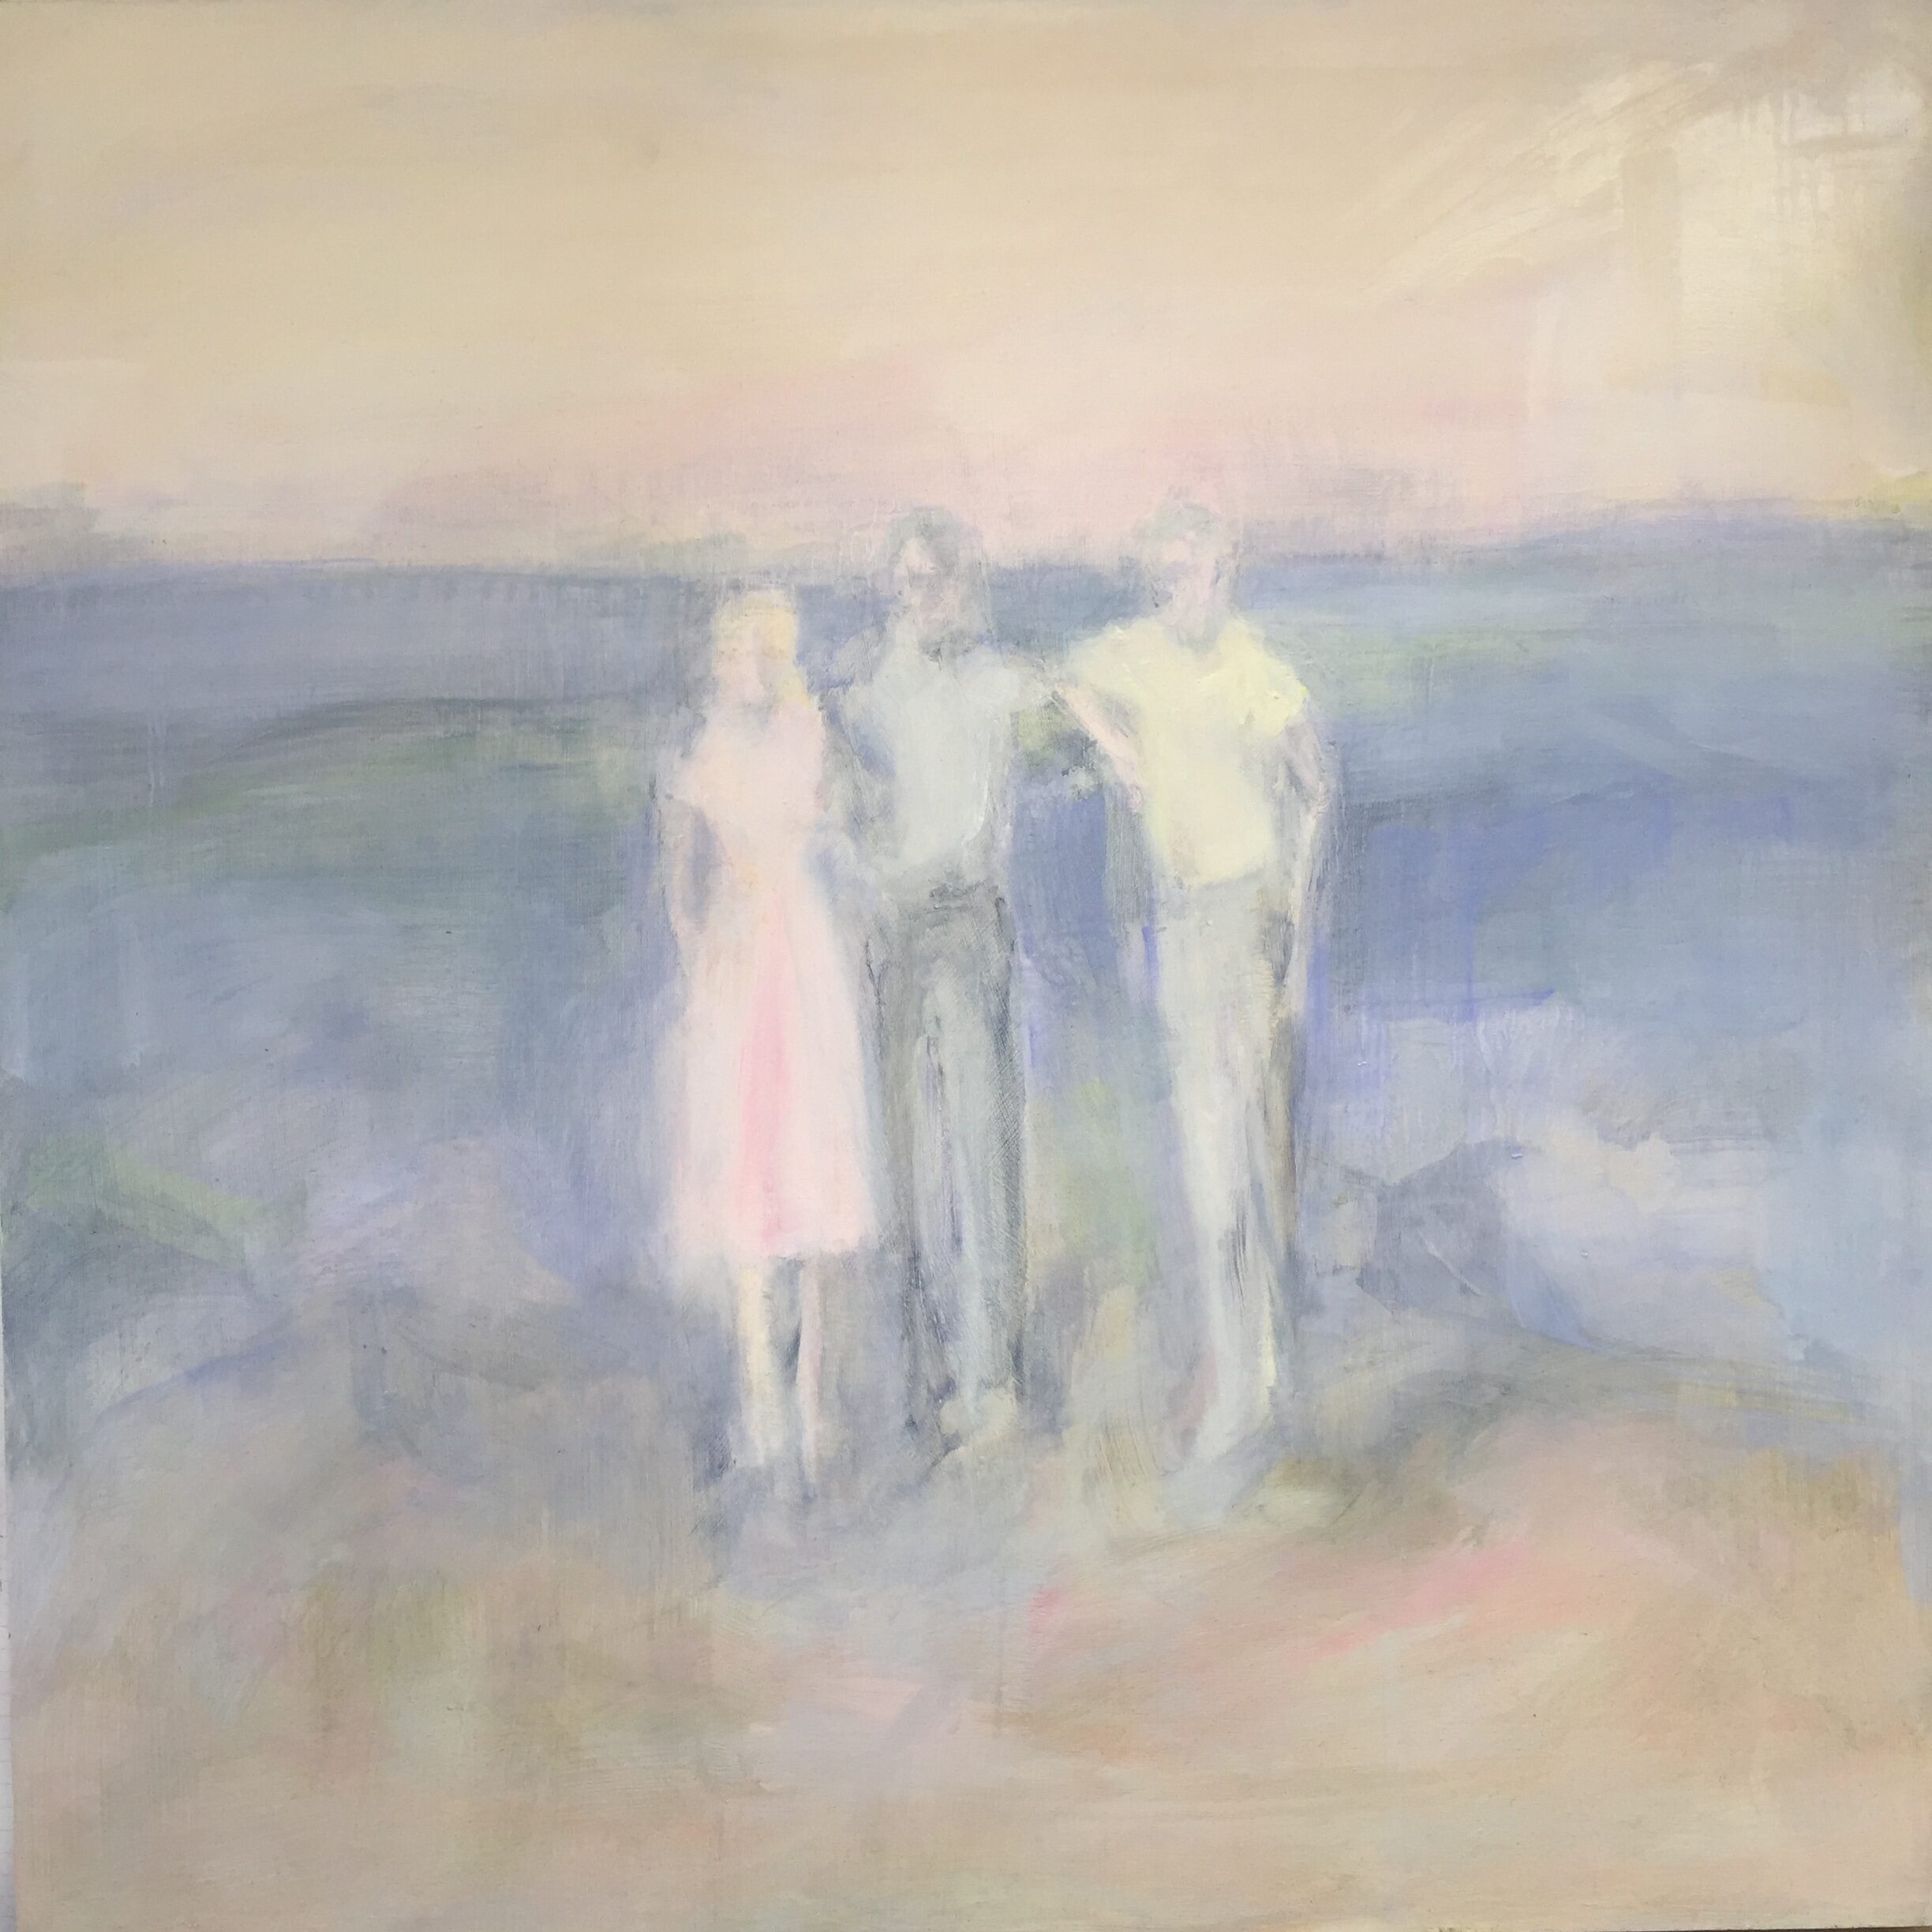 'Memory Travel', Louise Todd, Oil on cradled wooden panel, 50 x 50 cm